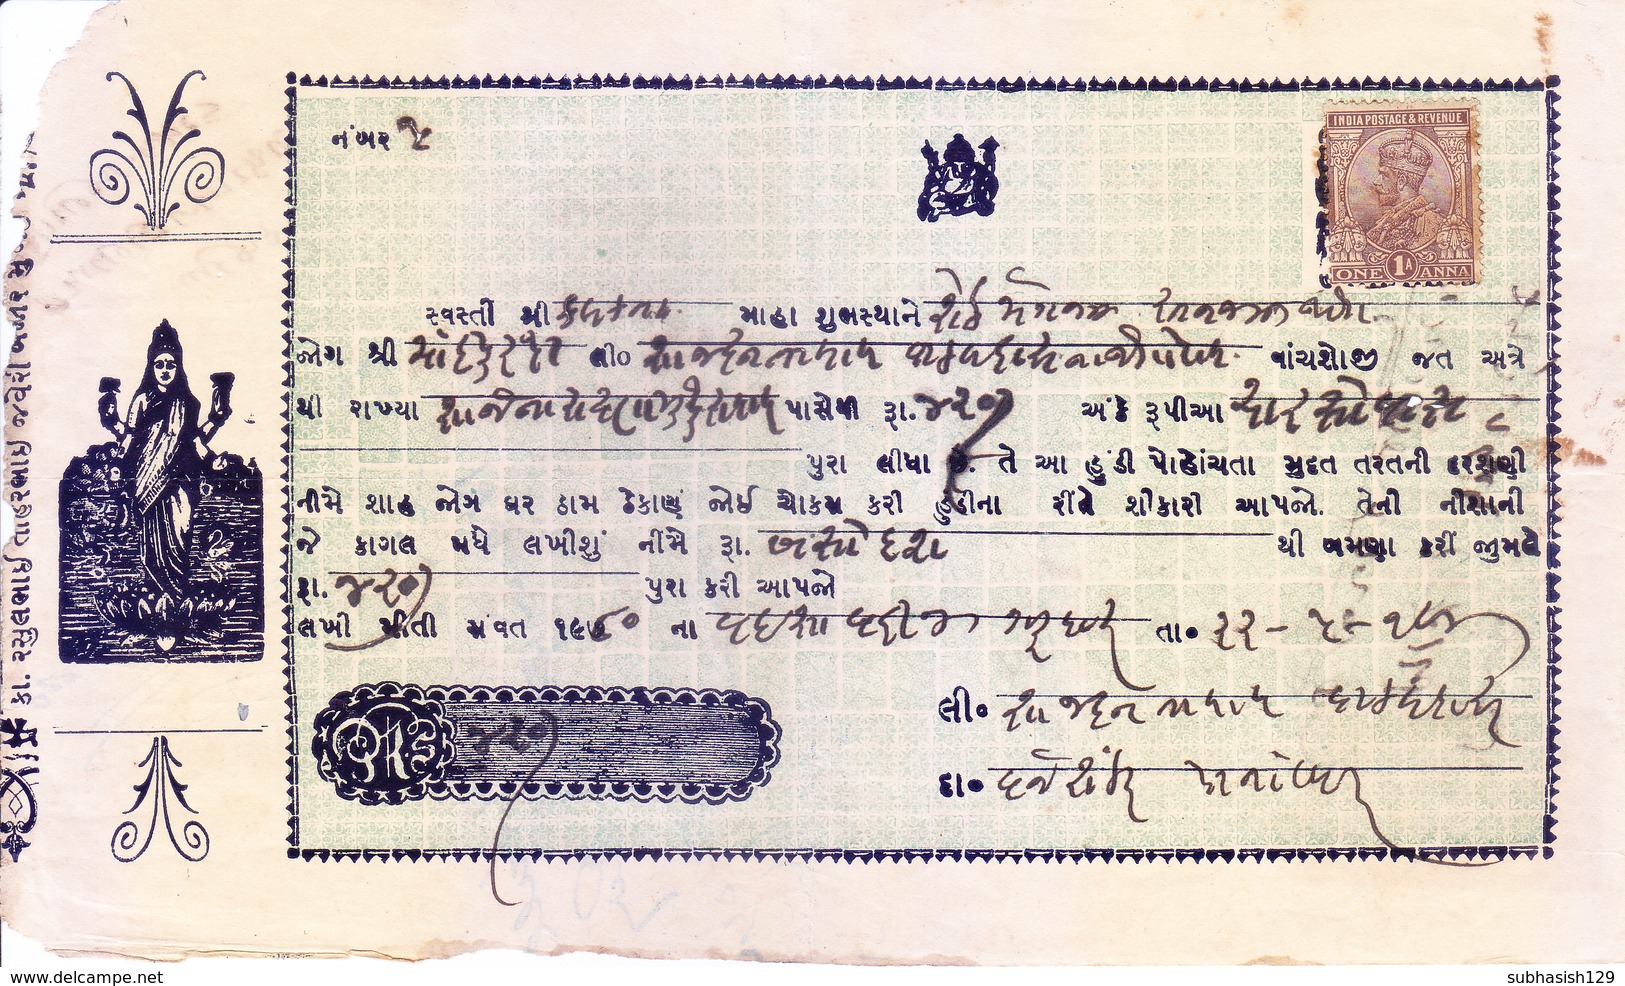 BRITISH INDIA - OLD MONEY RECEIPT IN GUJRATI LANGUAGE - USE OF KING GEORGE V ONE ANNA BROWN REVENUE STAMP - Letras De Cambio